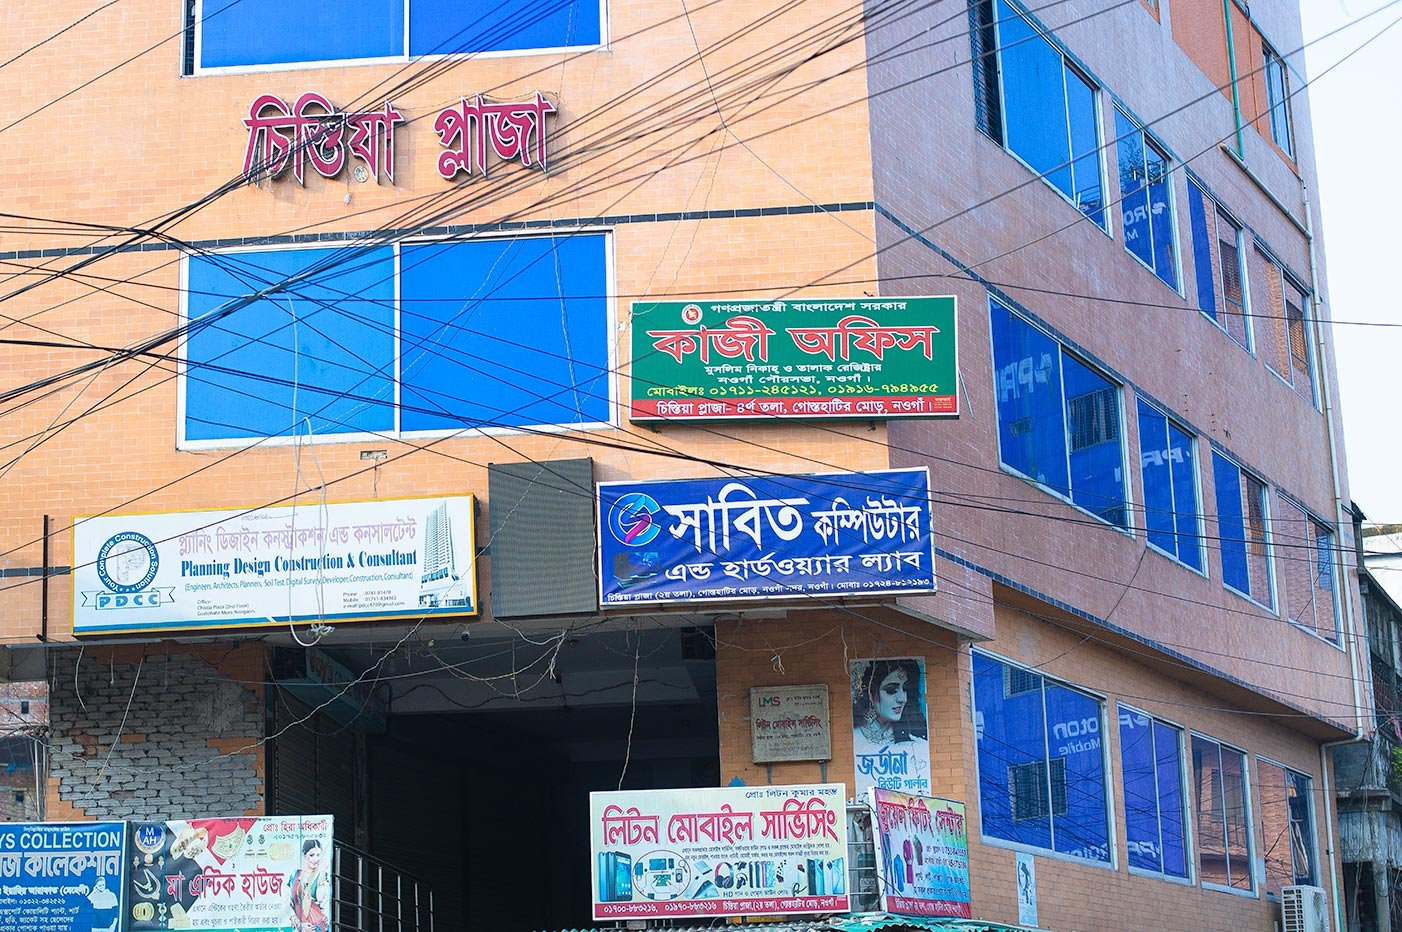 Official Kazi offices for Naogaon municipality’s 4th ward, situated in Chistia Plaza near Gosthotir Mor.